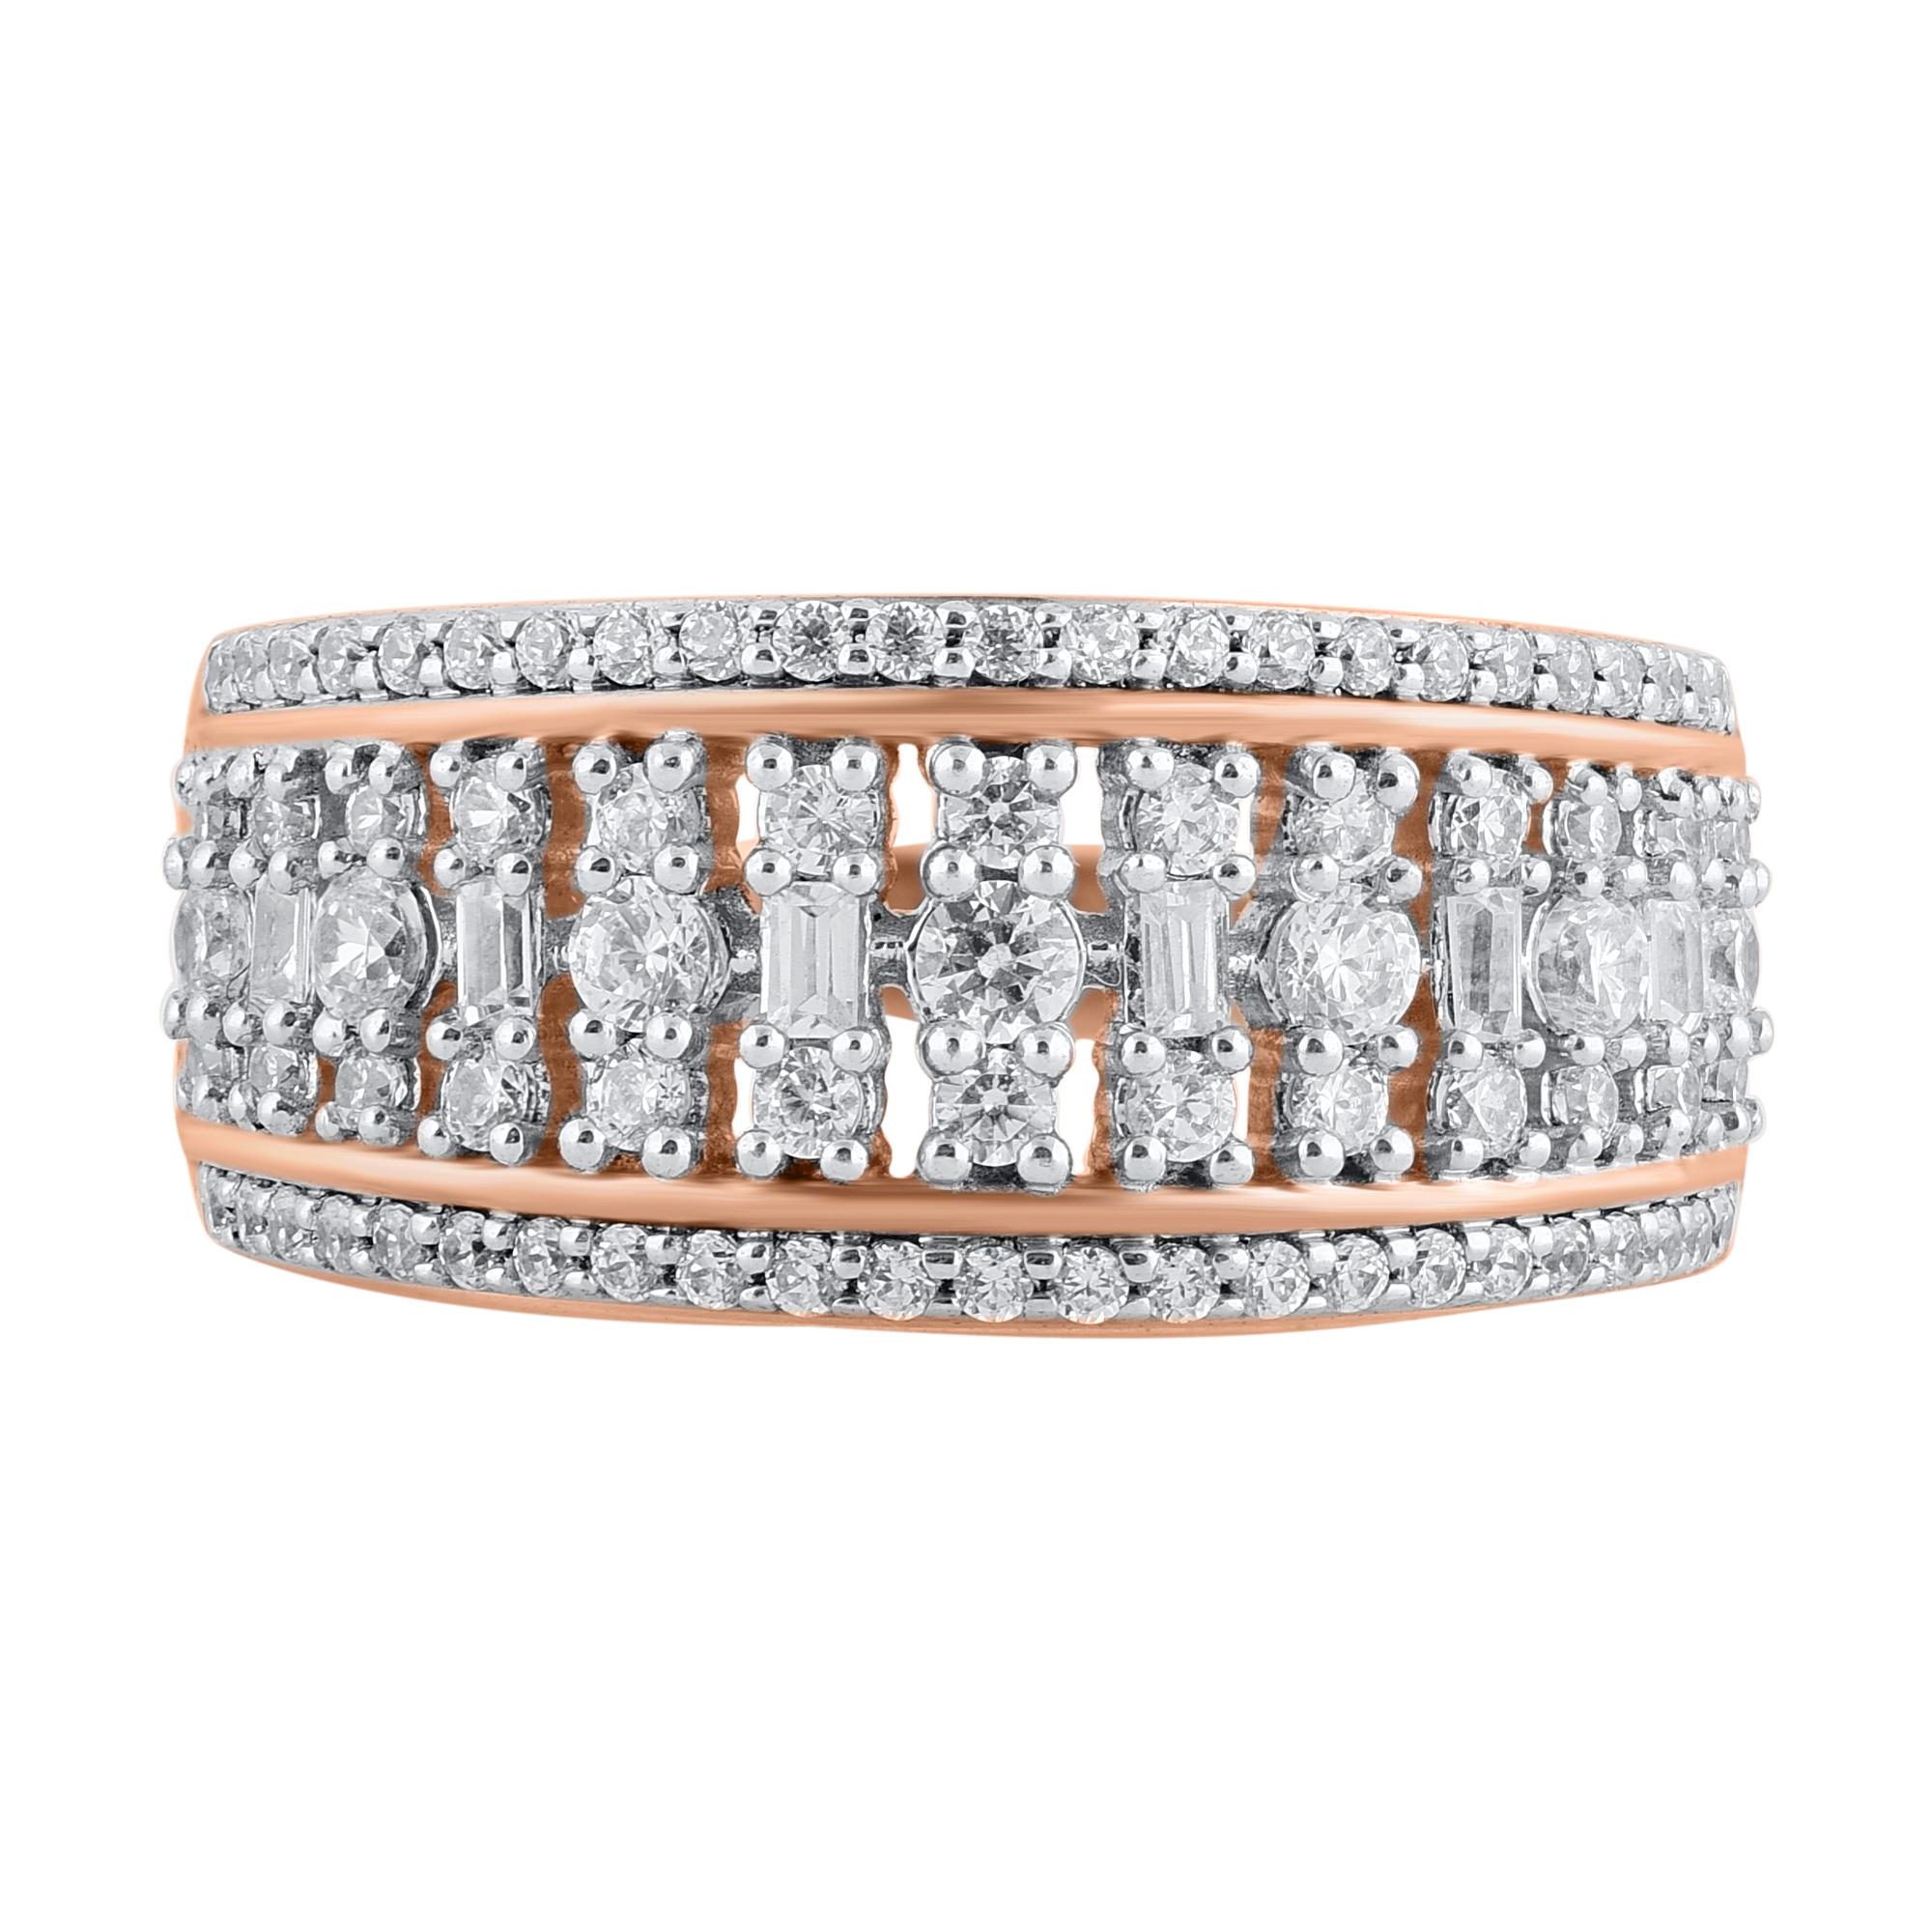 Contemporary TJD 1.0 Carat Round & Baguette Natural Diamond 14KT Rose Gold Wedding Band Ring For Sale